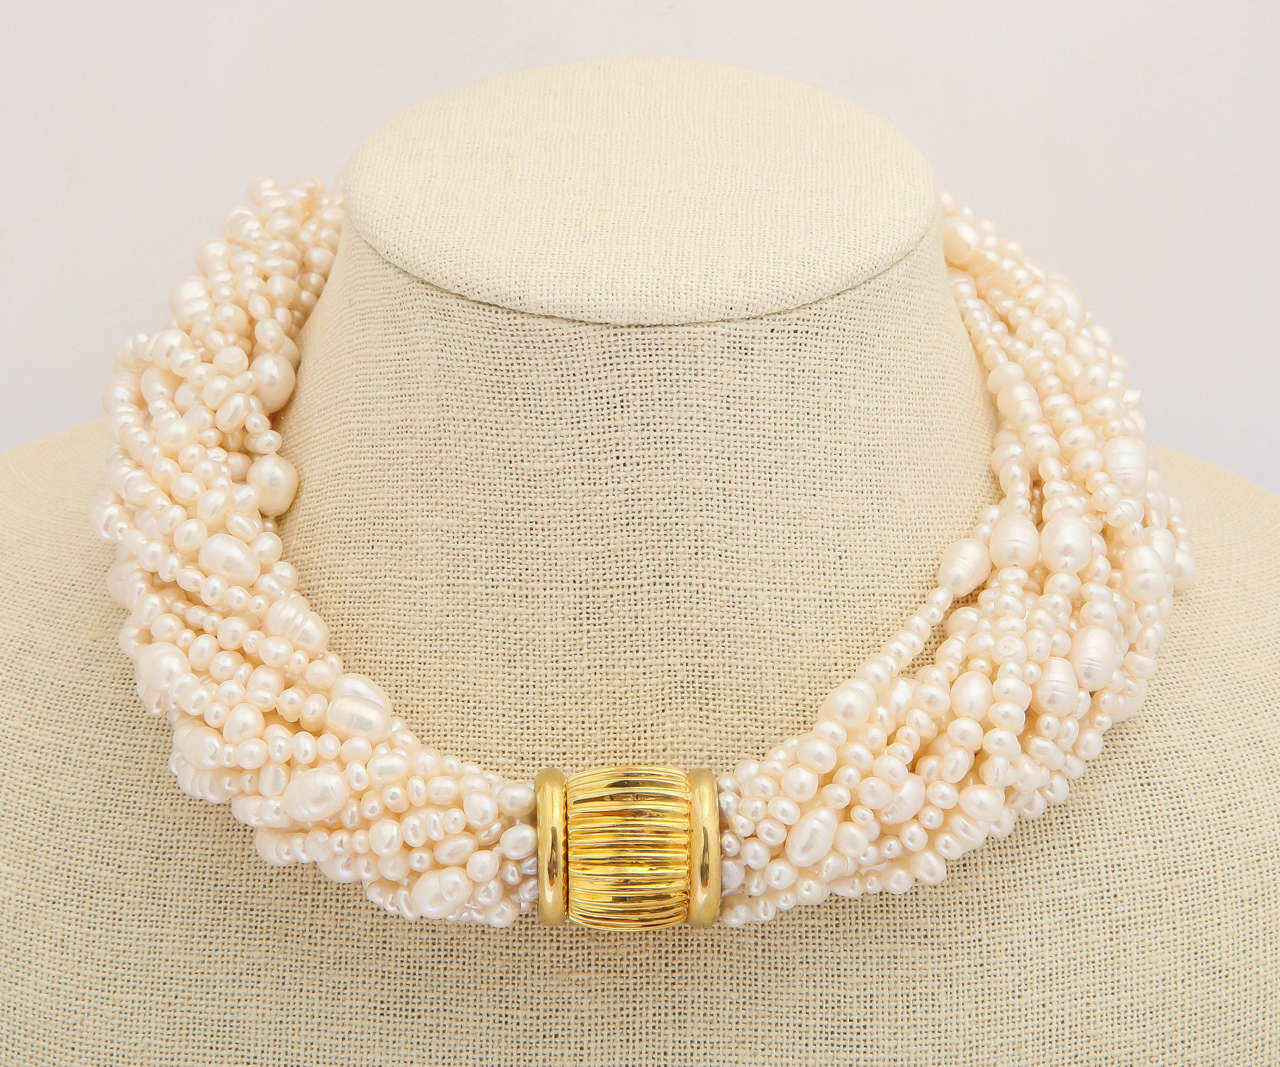 This lush necklace has 16 strands of multi-shape fresh water pearls to achieve a wonderful texture to compliment any ensemble. The vermeil clasp is magnetic and strong and secure. The total length of the necklace is 18-19 in. depending on the twist.